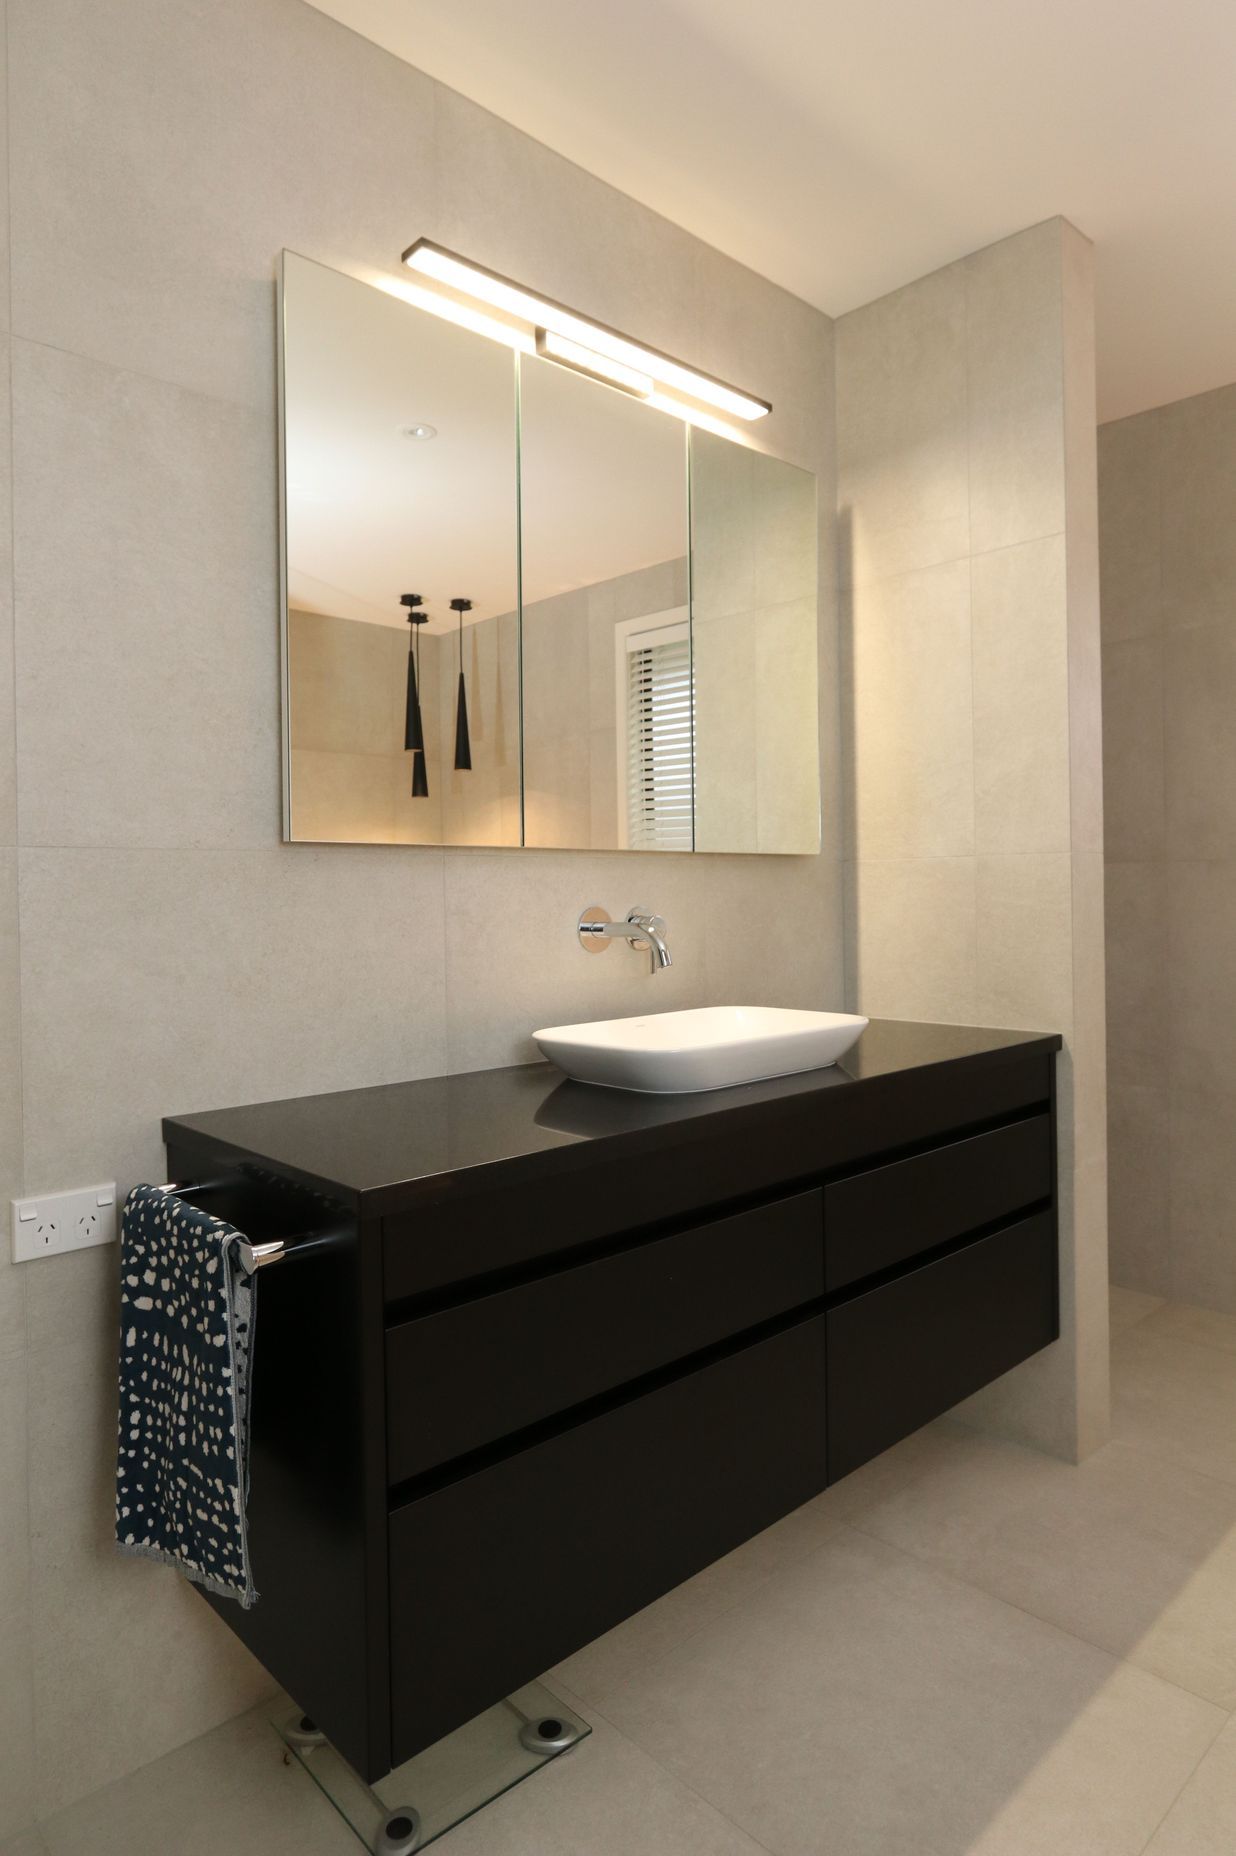 Recessed mirror cabinets in their main bathroom provides discreet storage space for the whole family without intruding on the spacious area.